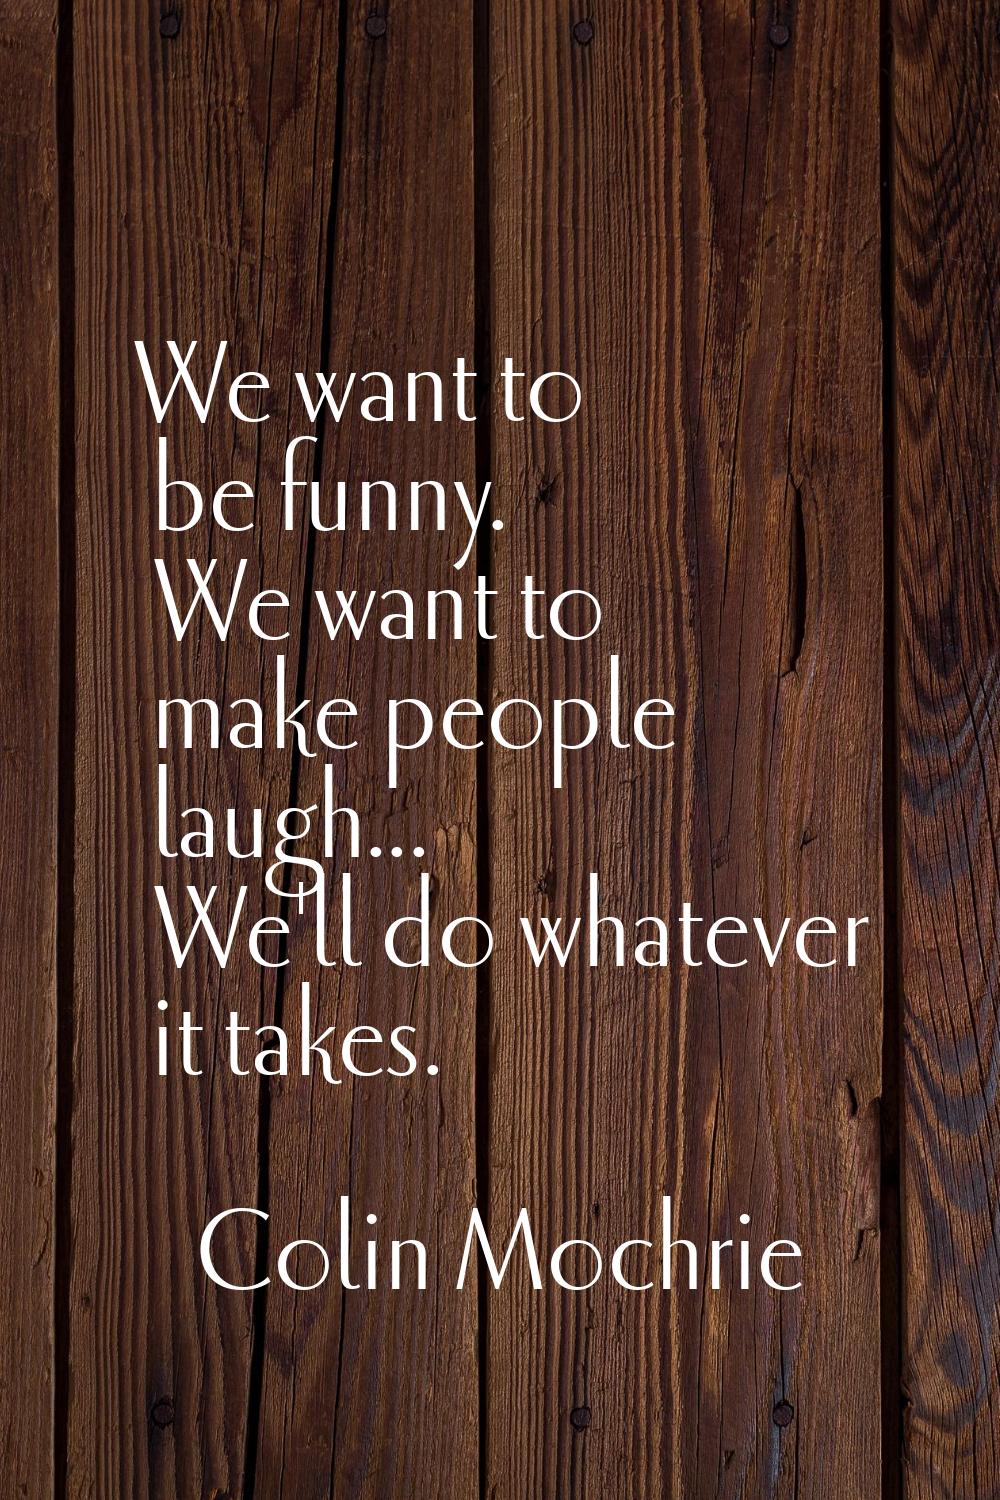 We want to be funny. We want to make people laugh... We'll do whatever it takes.